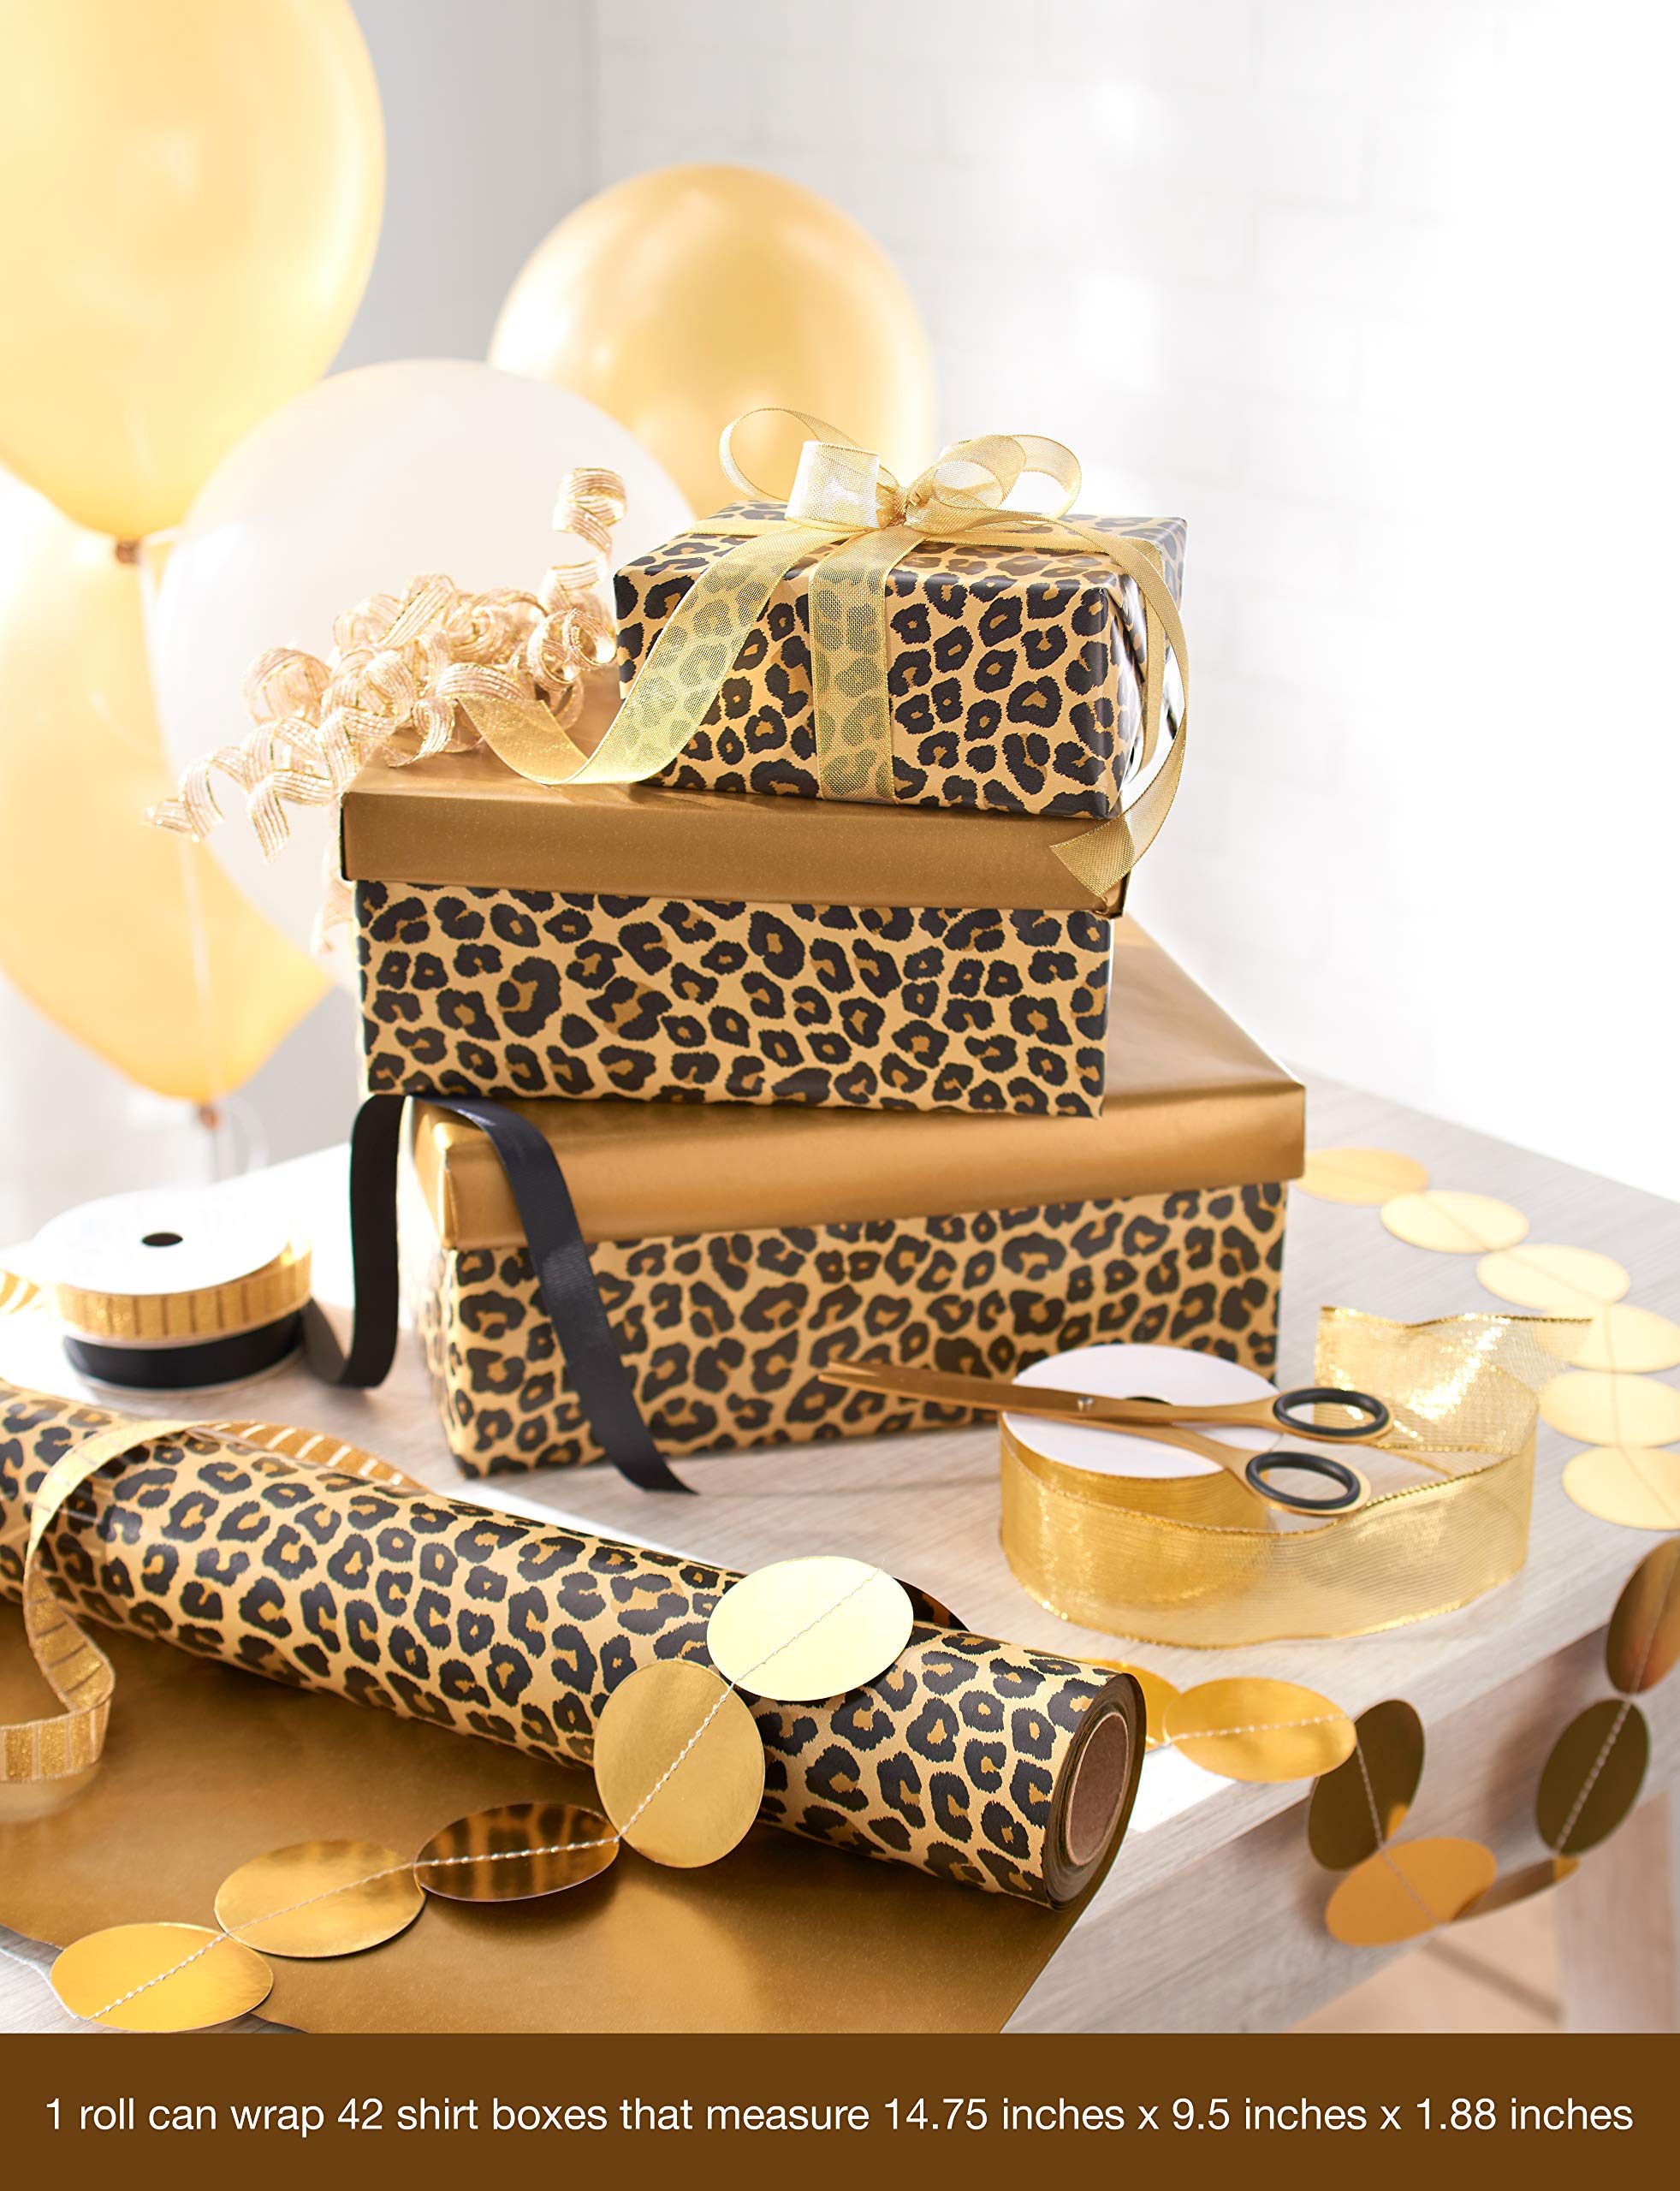 American Greetings Reversible Wrapping Paper Jumbo Roll for Birthdays, Graduation and All Occasions, Leopard and Gold (1 Roll, 175 sq. ft.)